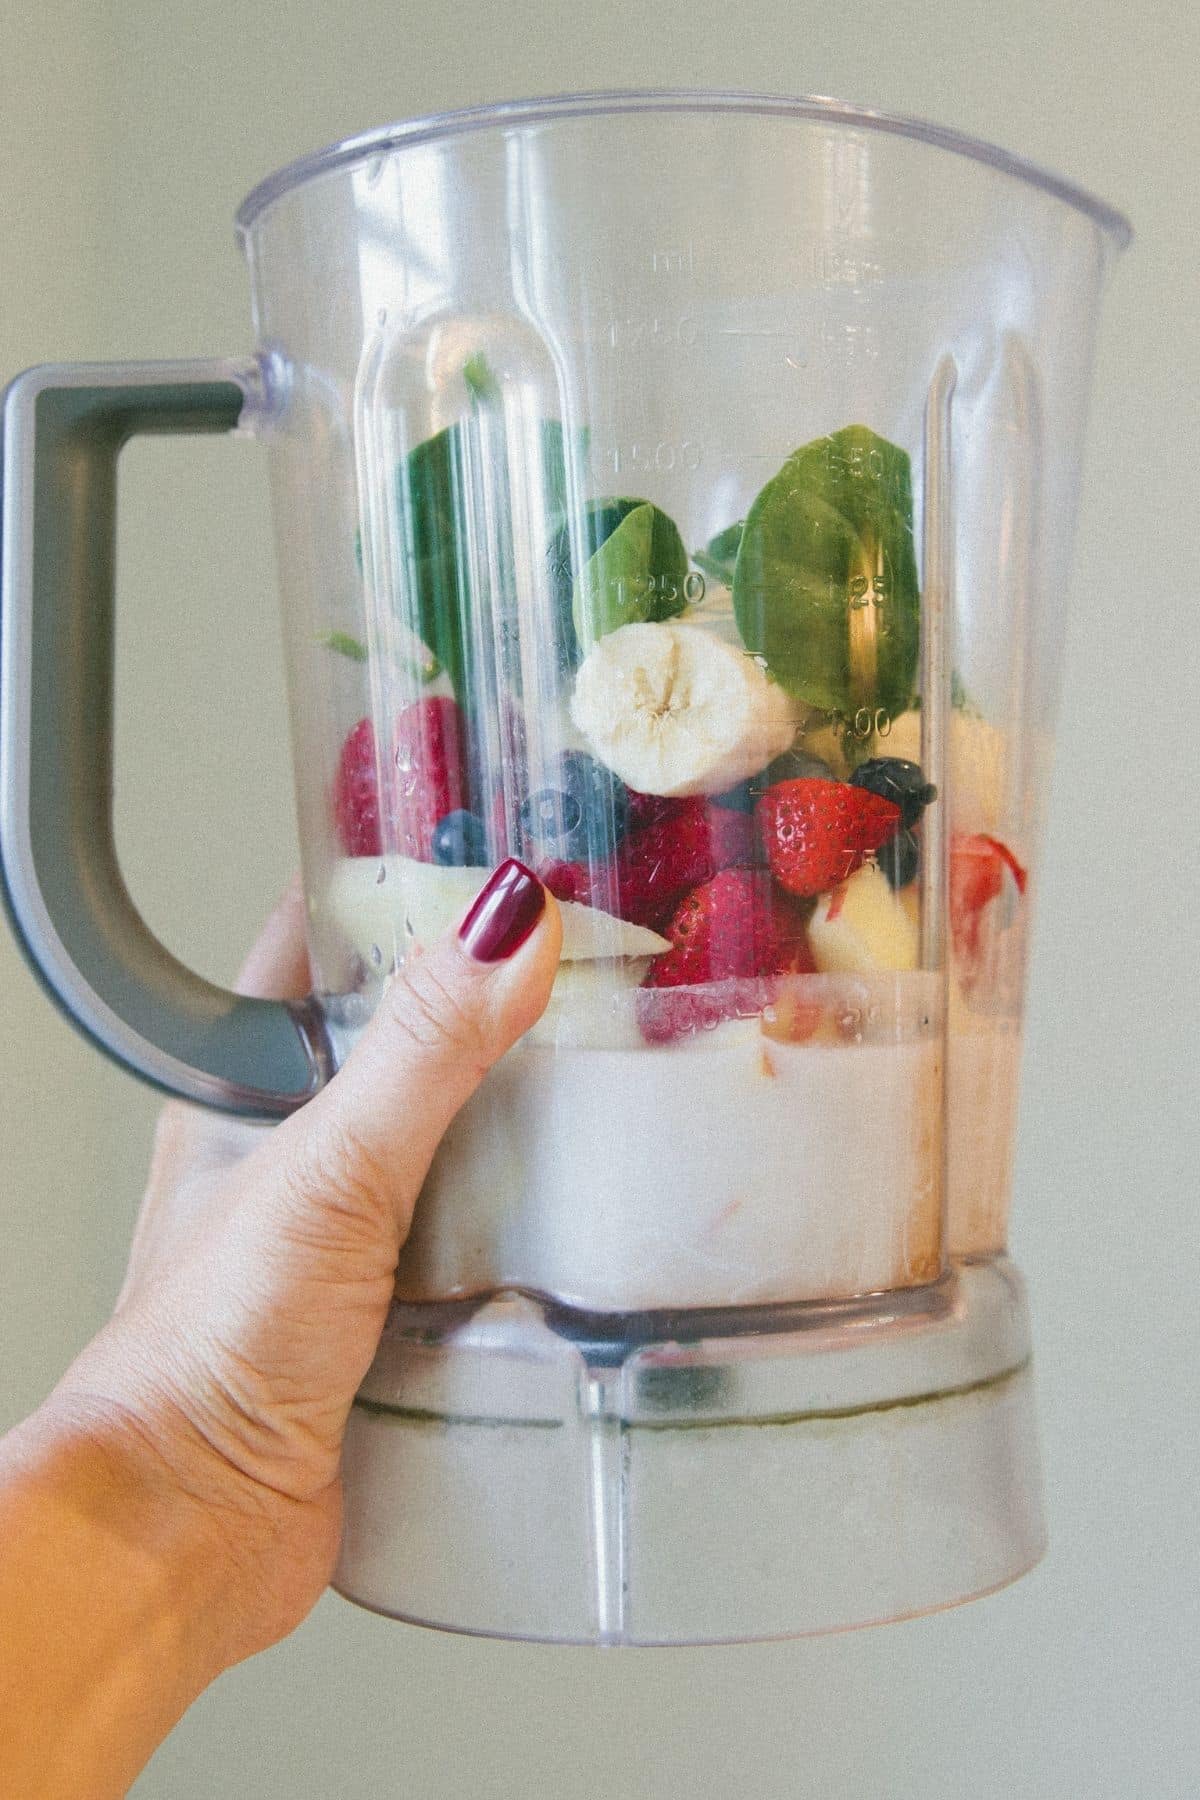 blender with fruit and greens